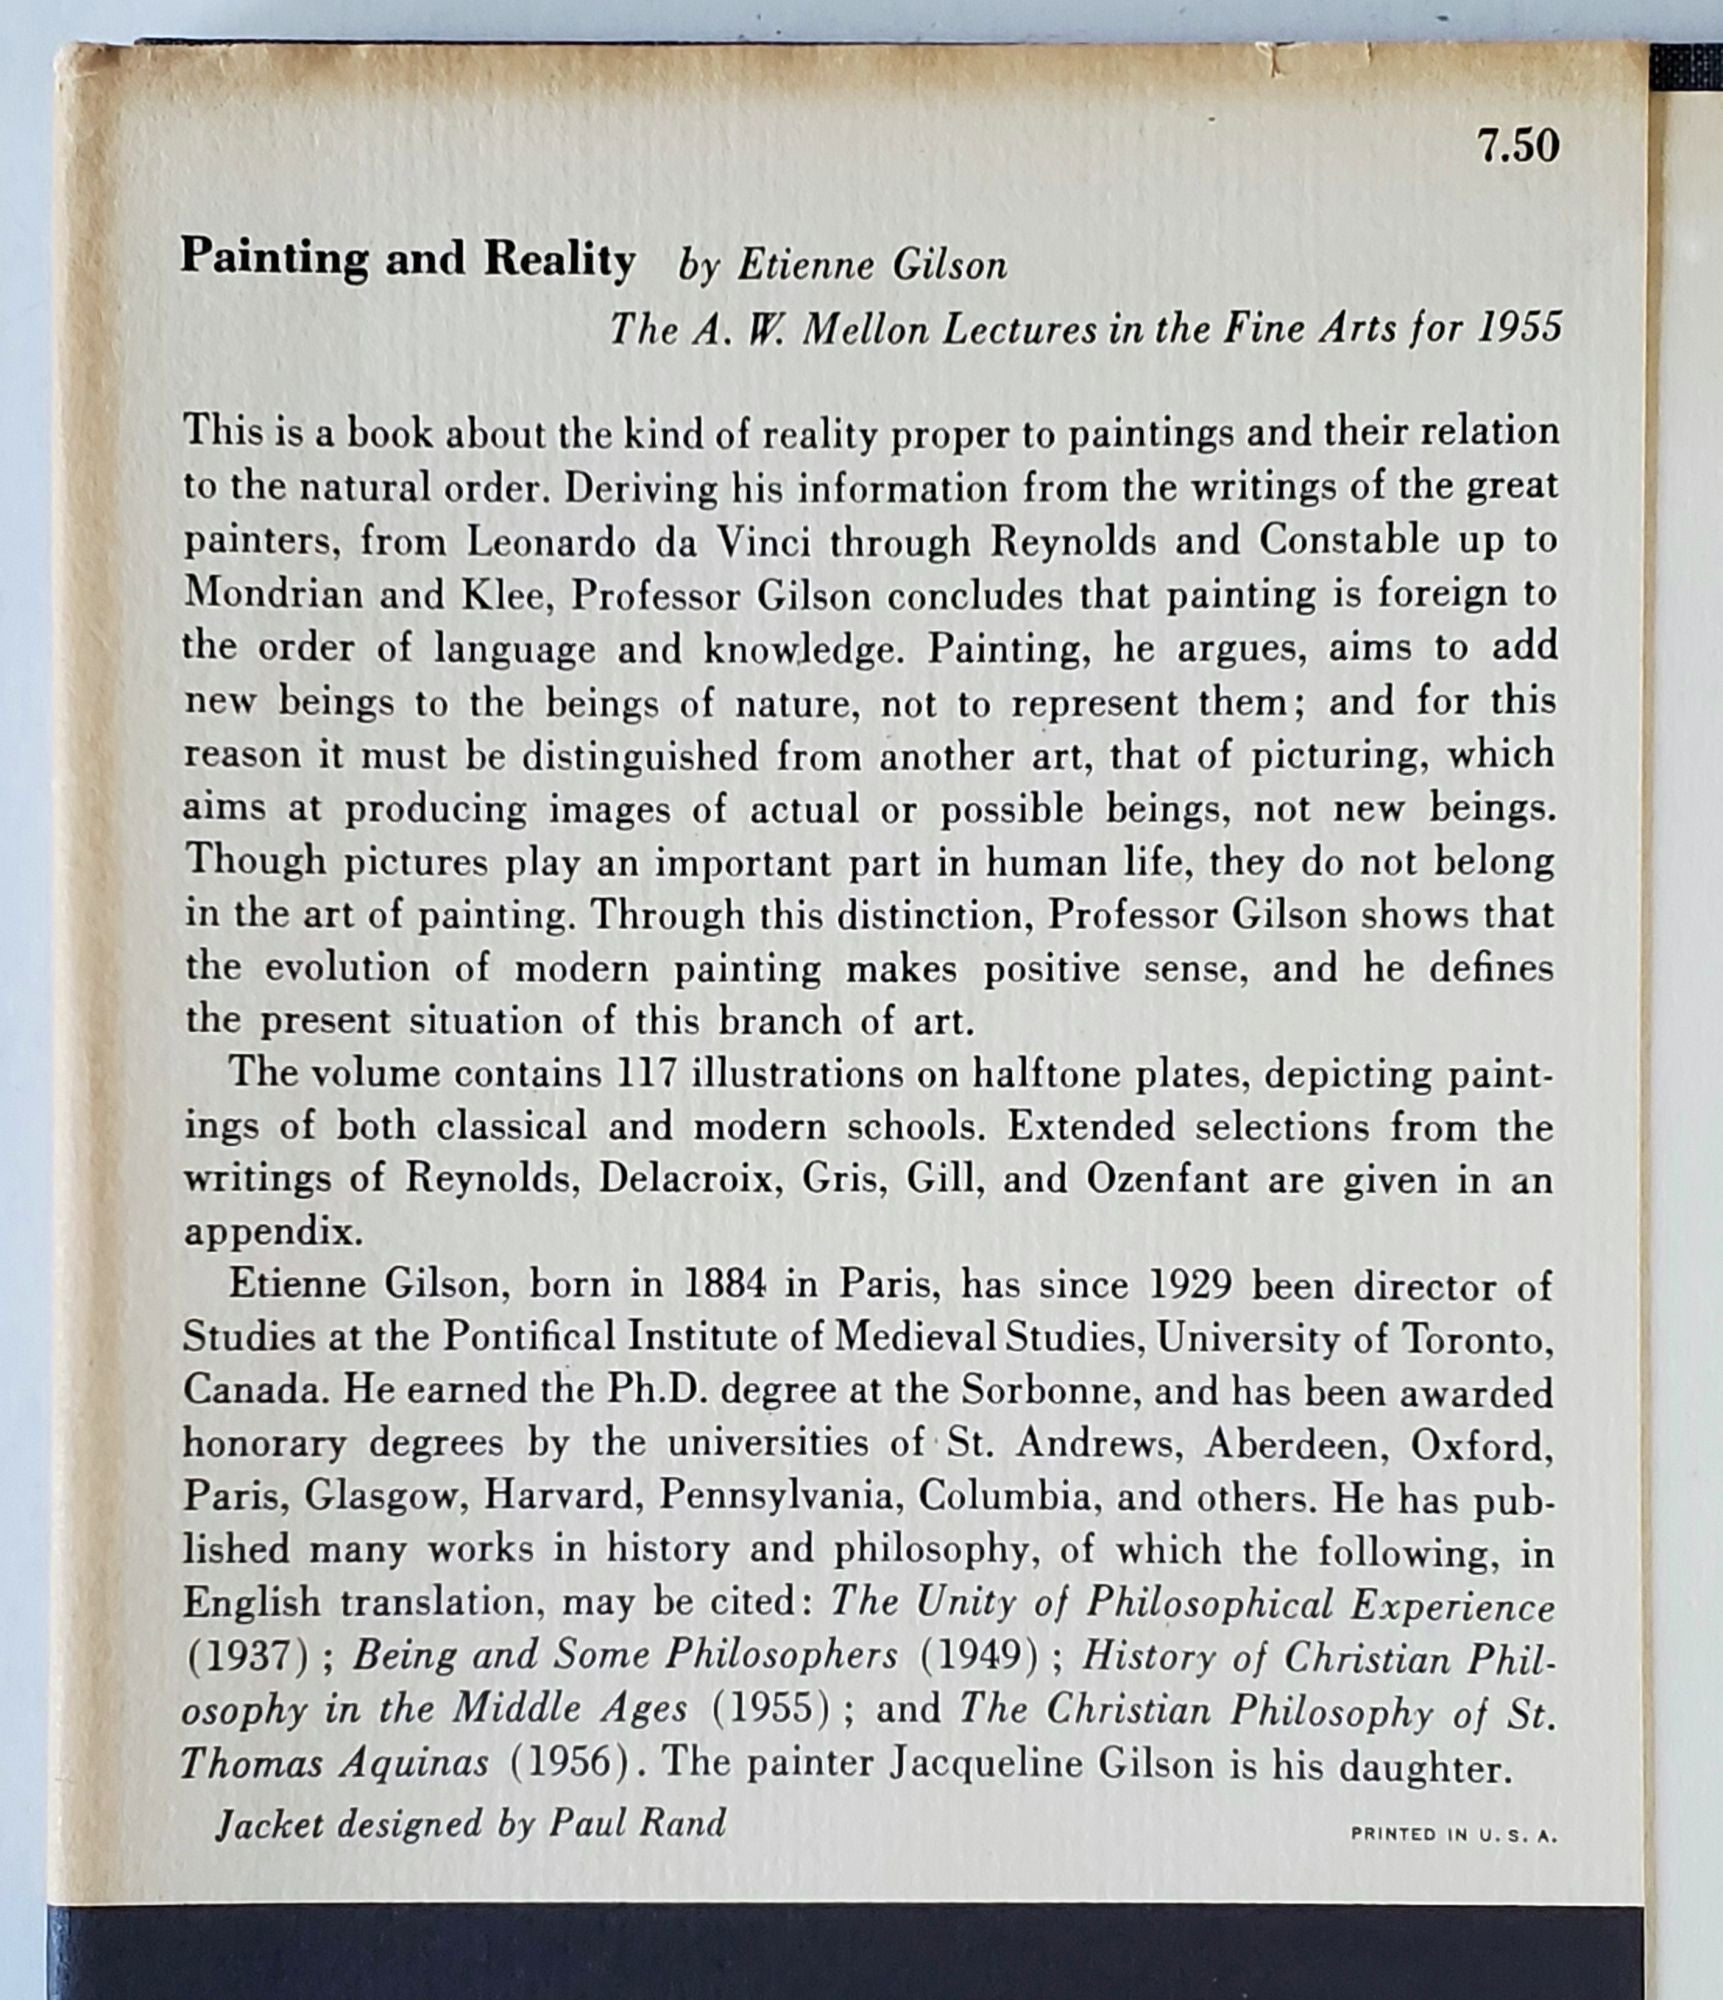 Painting and Reality: Delivered for the A.W. Mellon Lectures in the Fine Arts, 1955 [Book]